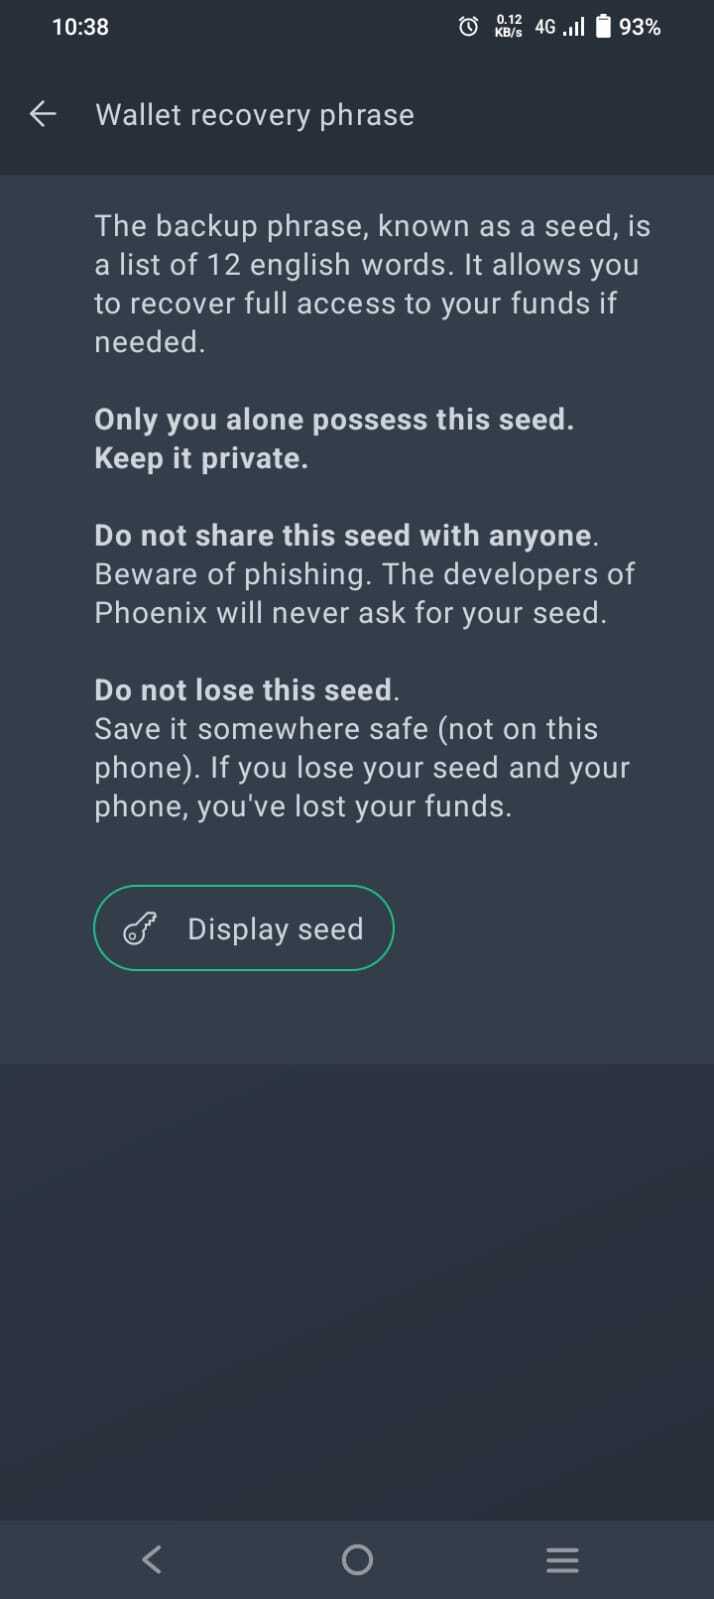 Phoenix wallet recovery phrase back up screen